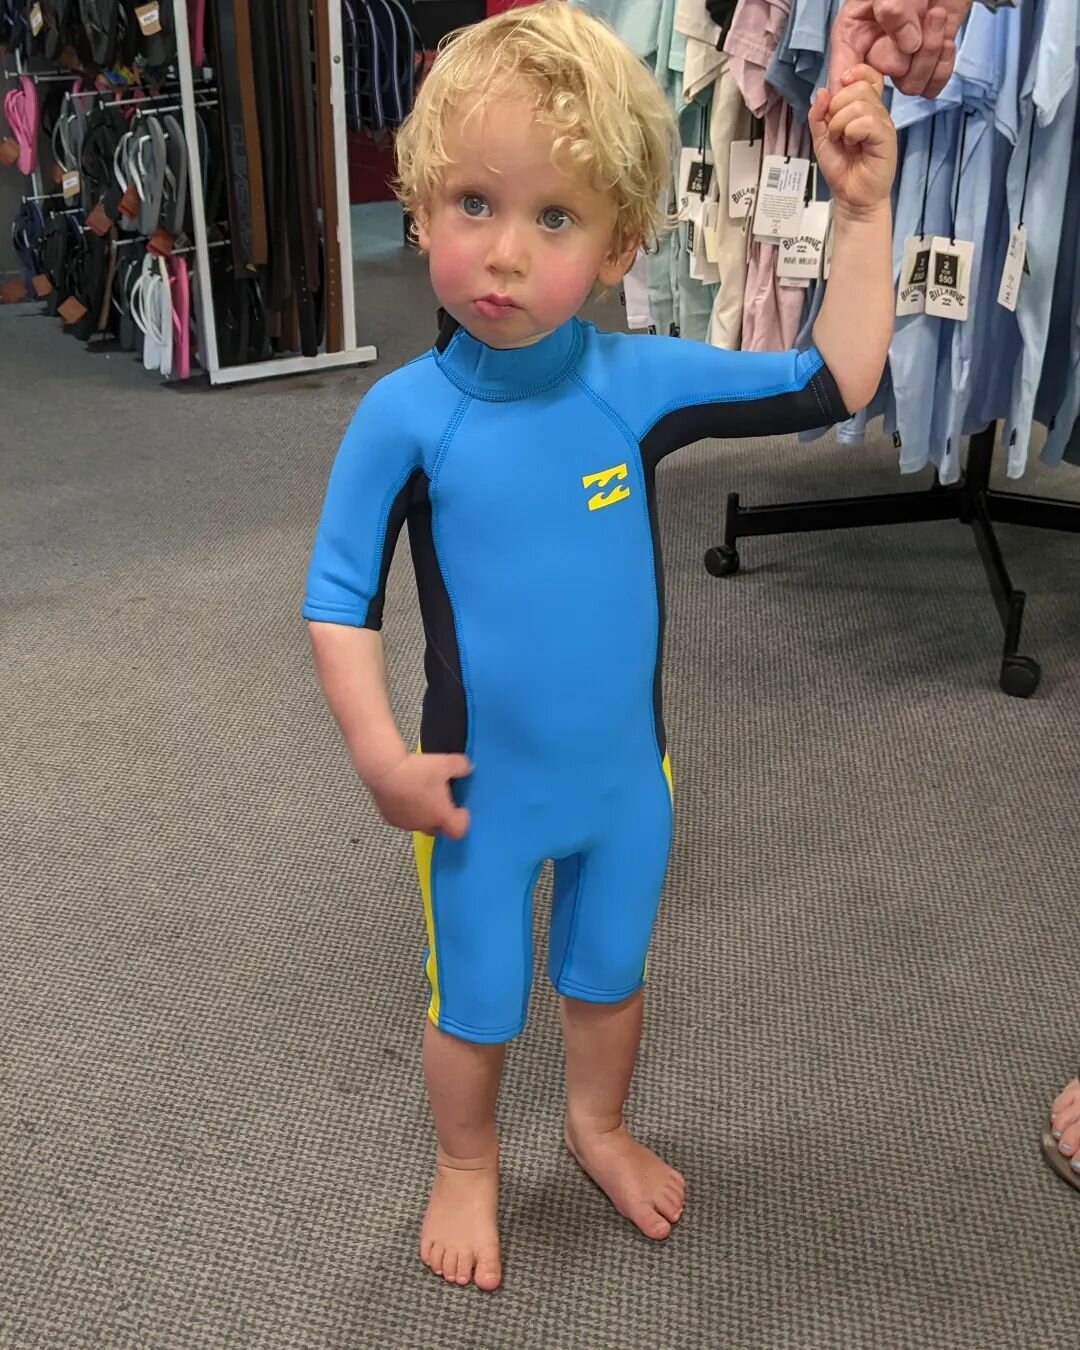 We start our water babies young at Phillip Island ...Sam looking ready to hit the waves such a beautiful boy . #surf # funinthesun #surfmud  #nalasblockout #waves #phillipisland